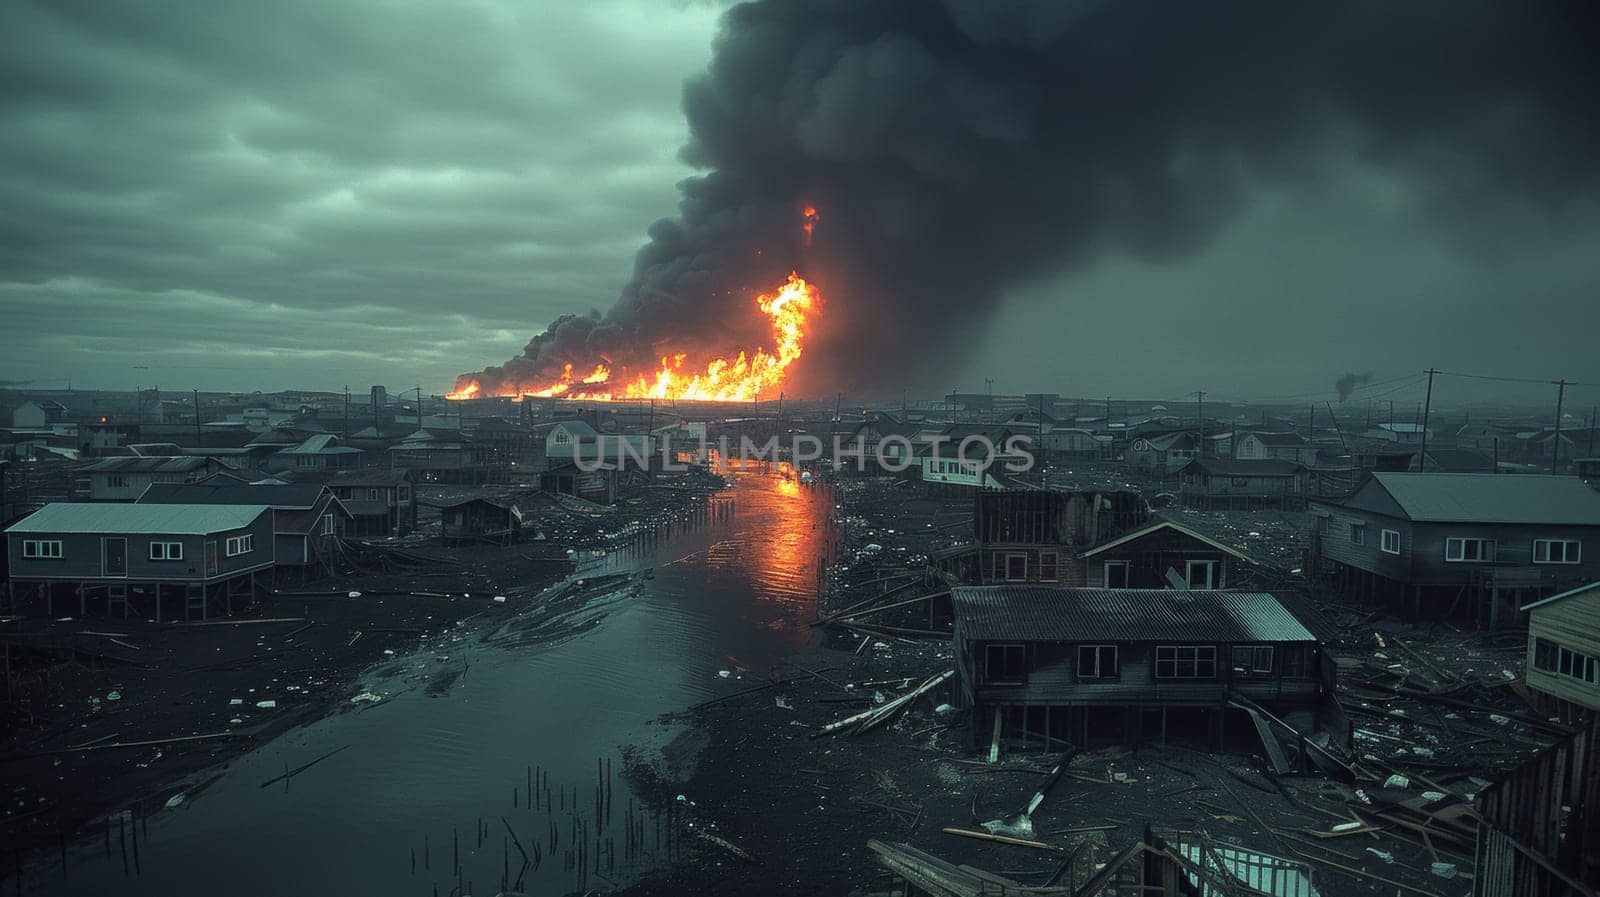 A large fire is burning in a city near some houses